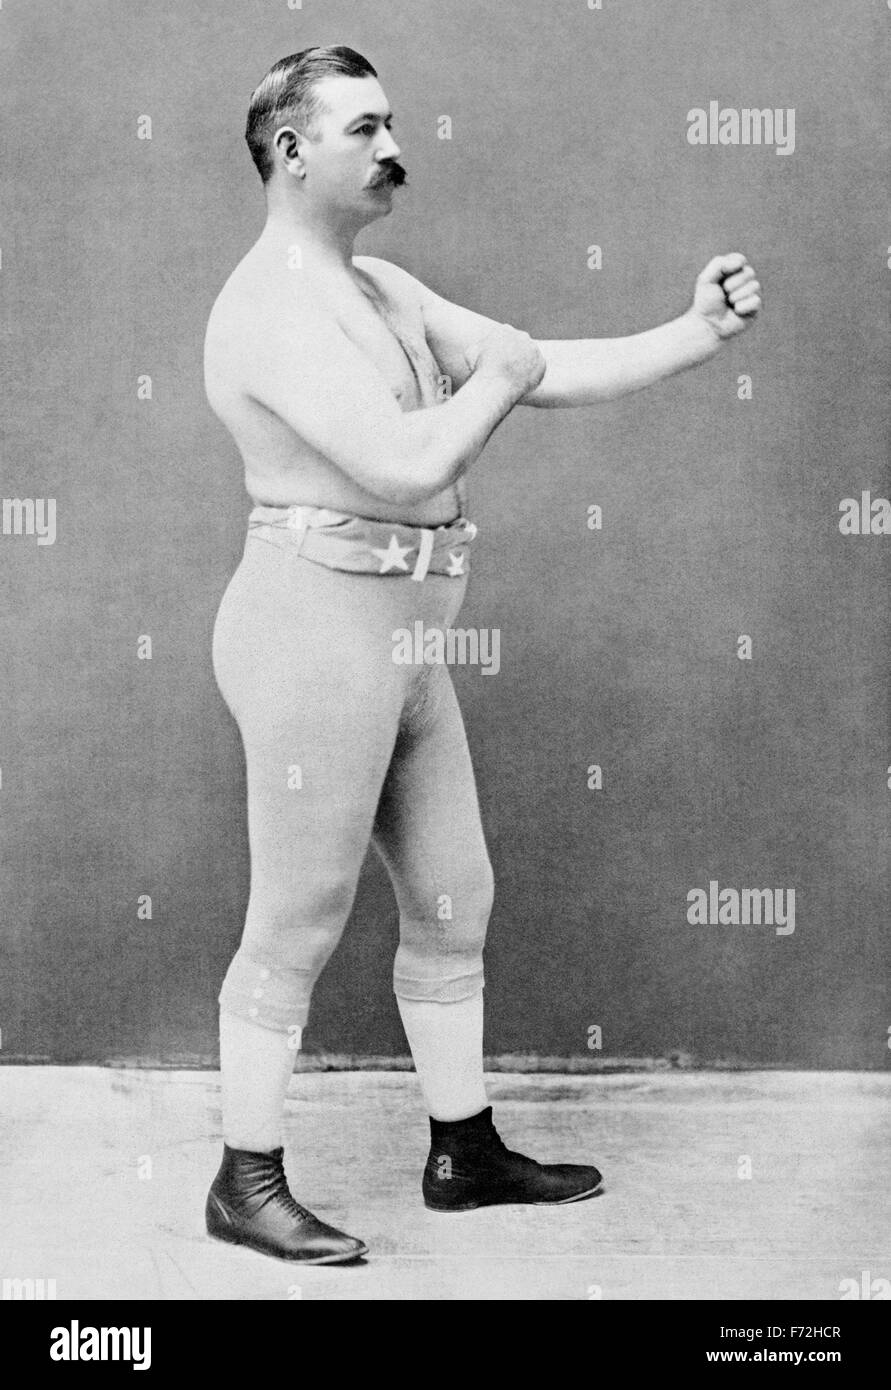 Vintage portrait photo of legendary American bare-knuckle and gloved boxer  John L Sullivan (1858 - 1918). Sullivan, nicknamed "The Boston Strong Boy",  is generally regarded as the last bare-knuckle World Heavyweight Champion